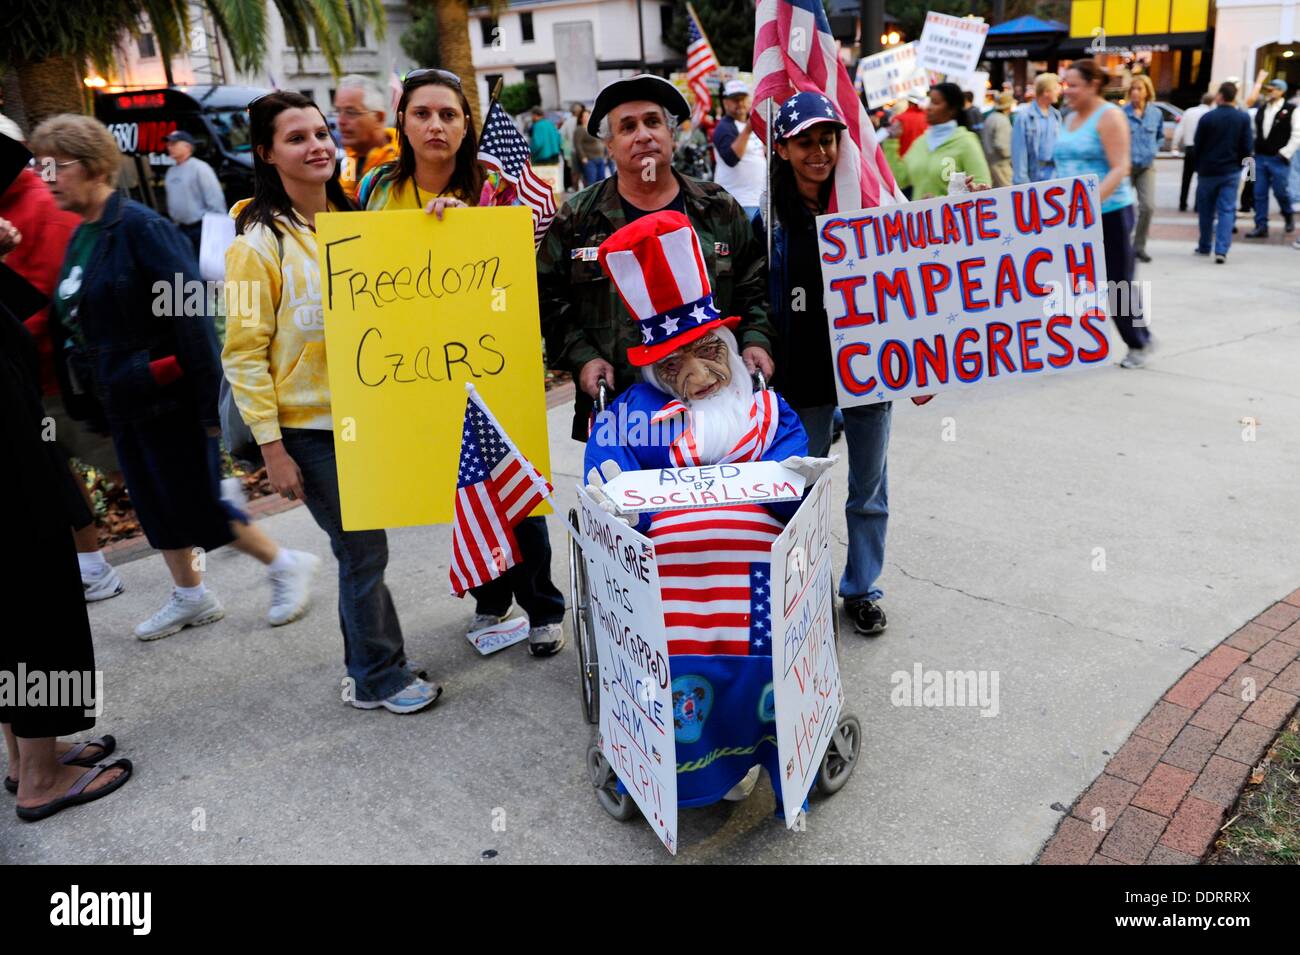 Orlando Florida T Tea Party protest of Government actions and policies Stock Photo